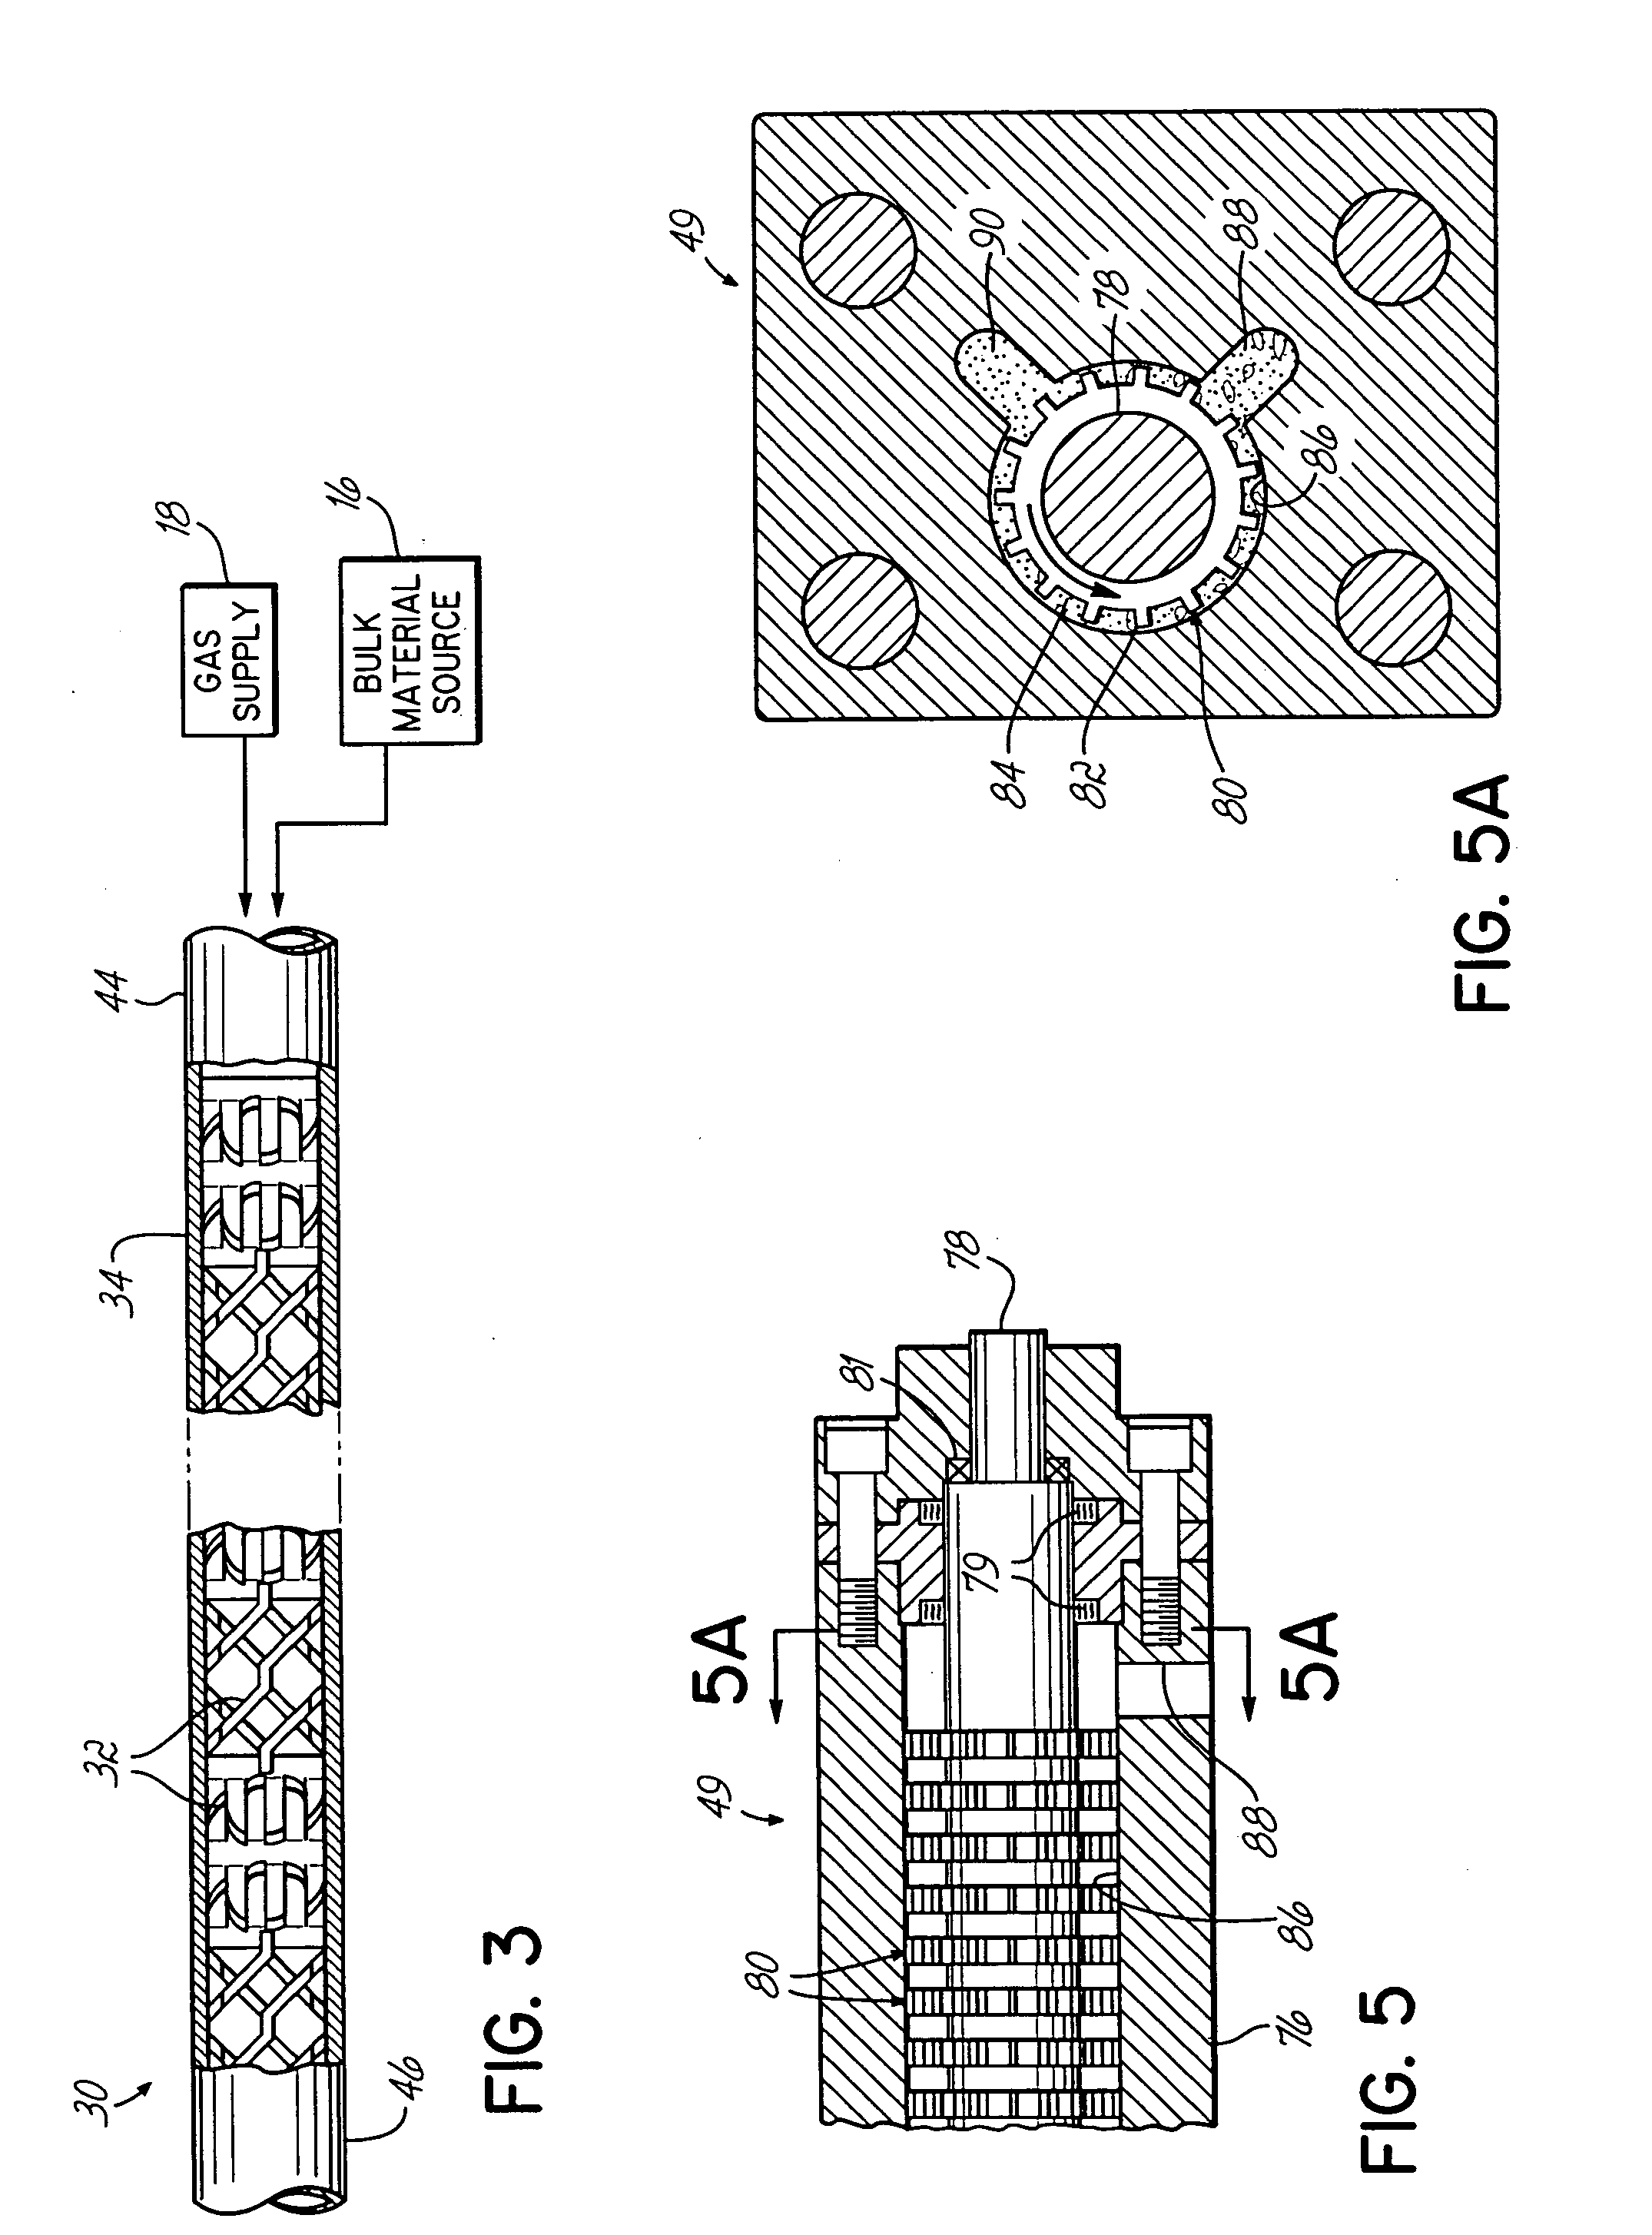 Method and apparatus for producing closed cell foam